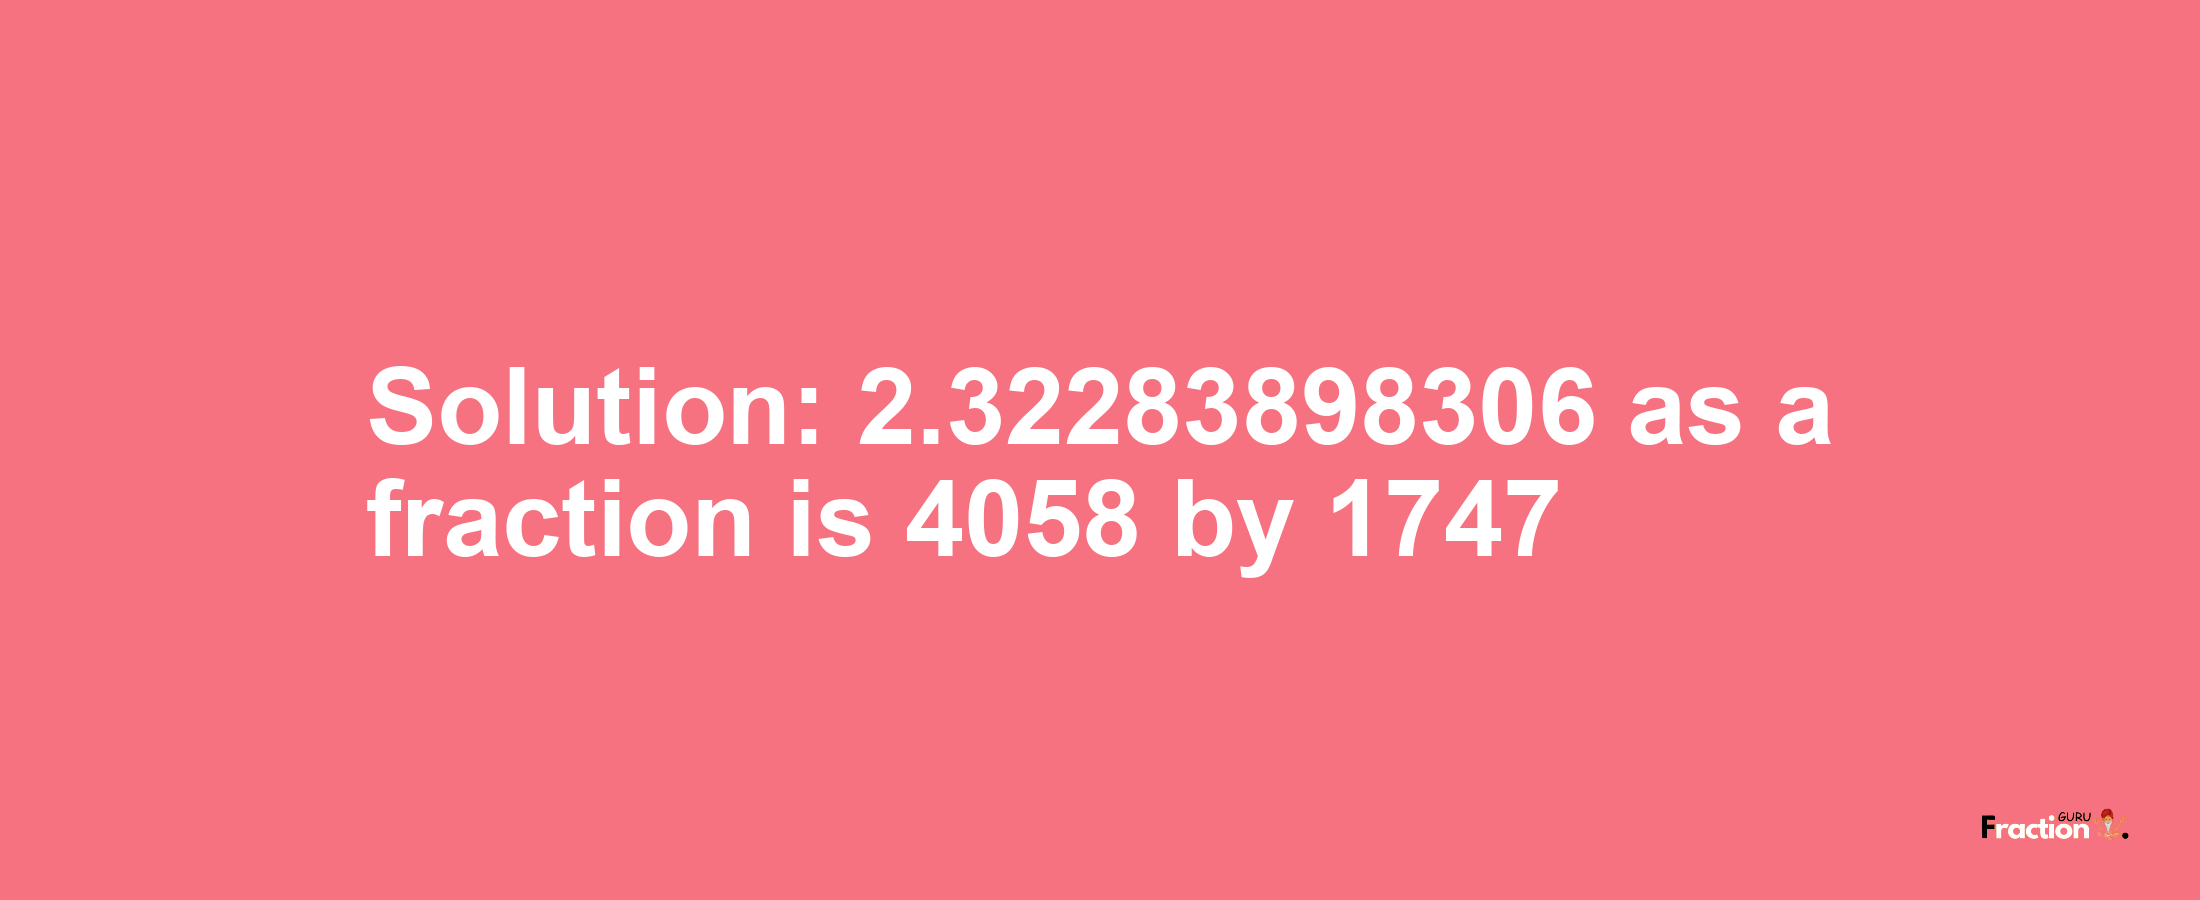 Solution:2.32283898306 as a fraction is 4058/1747